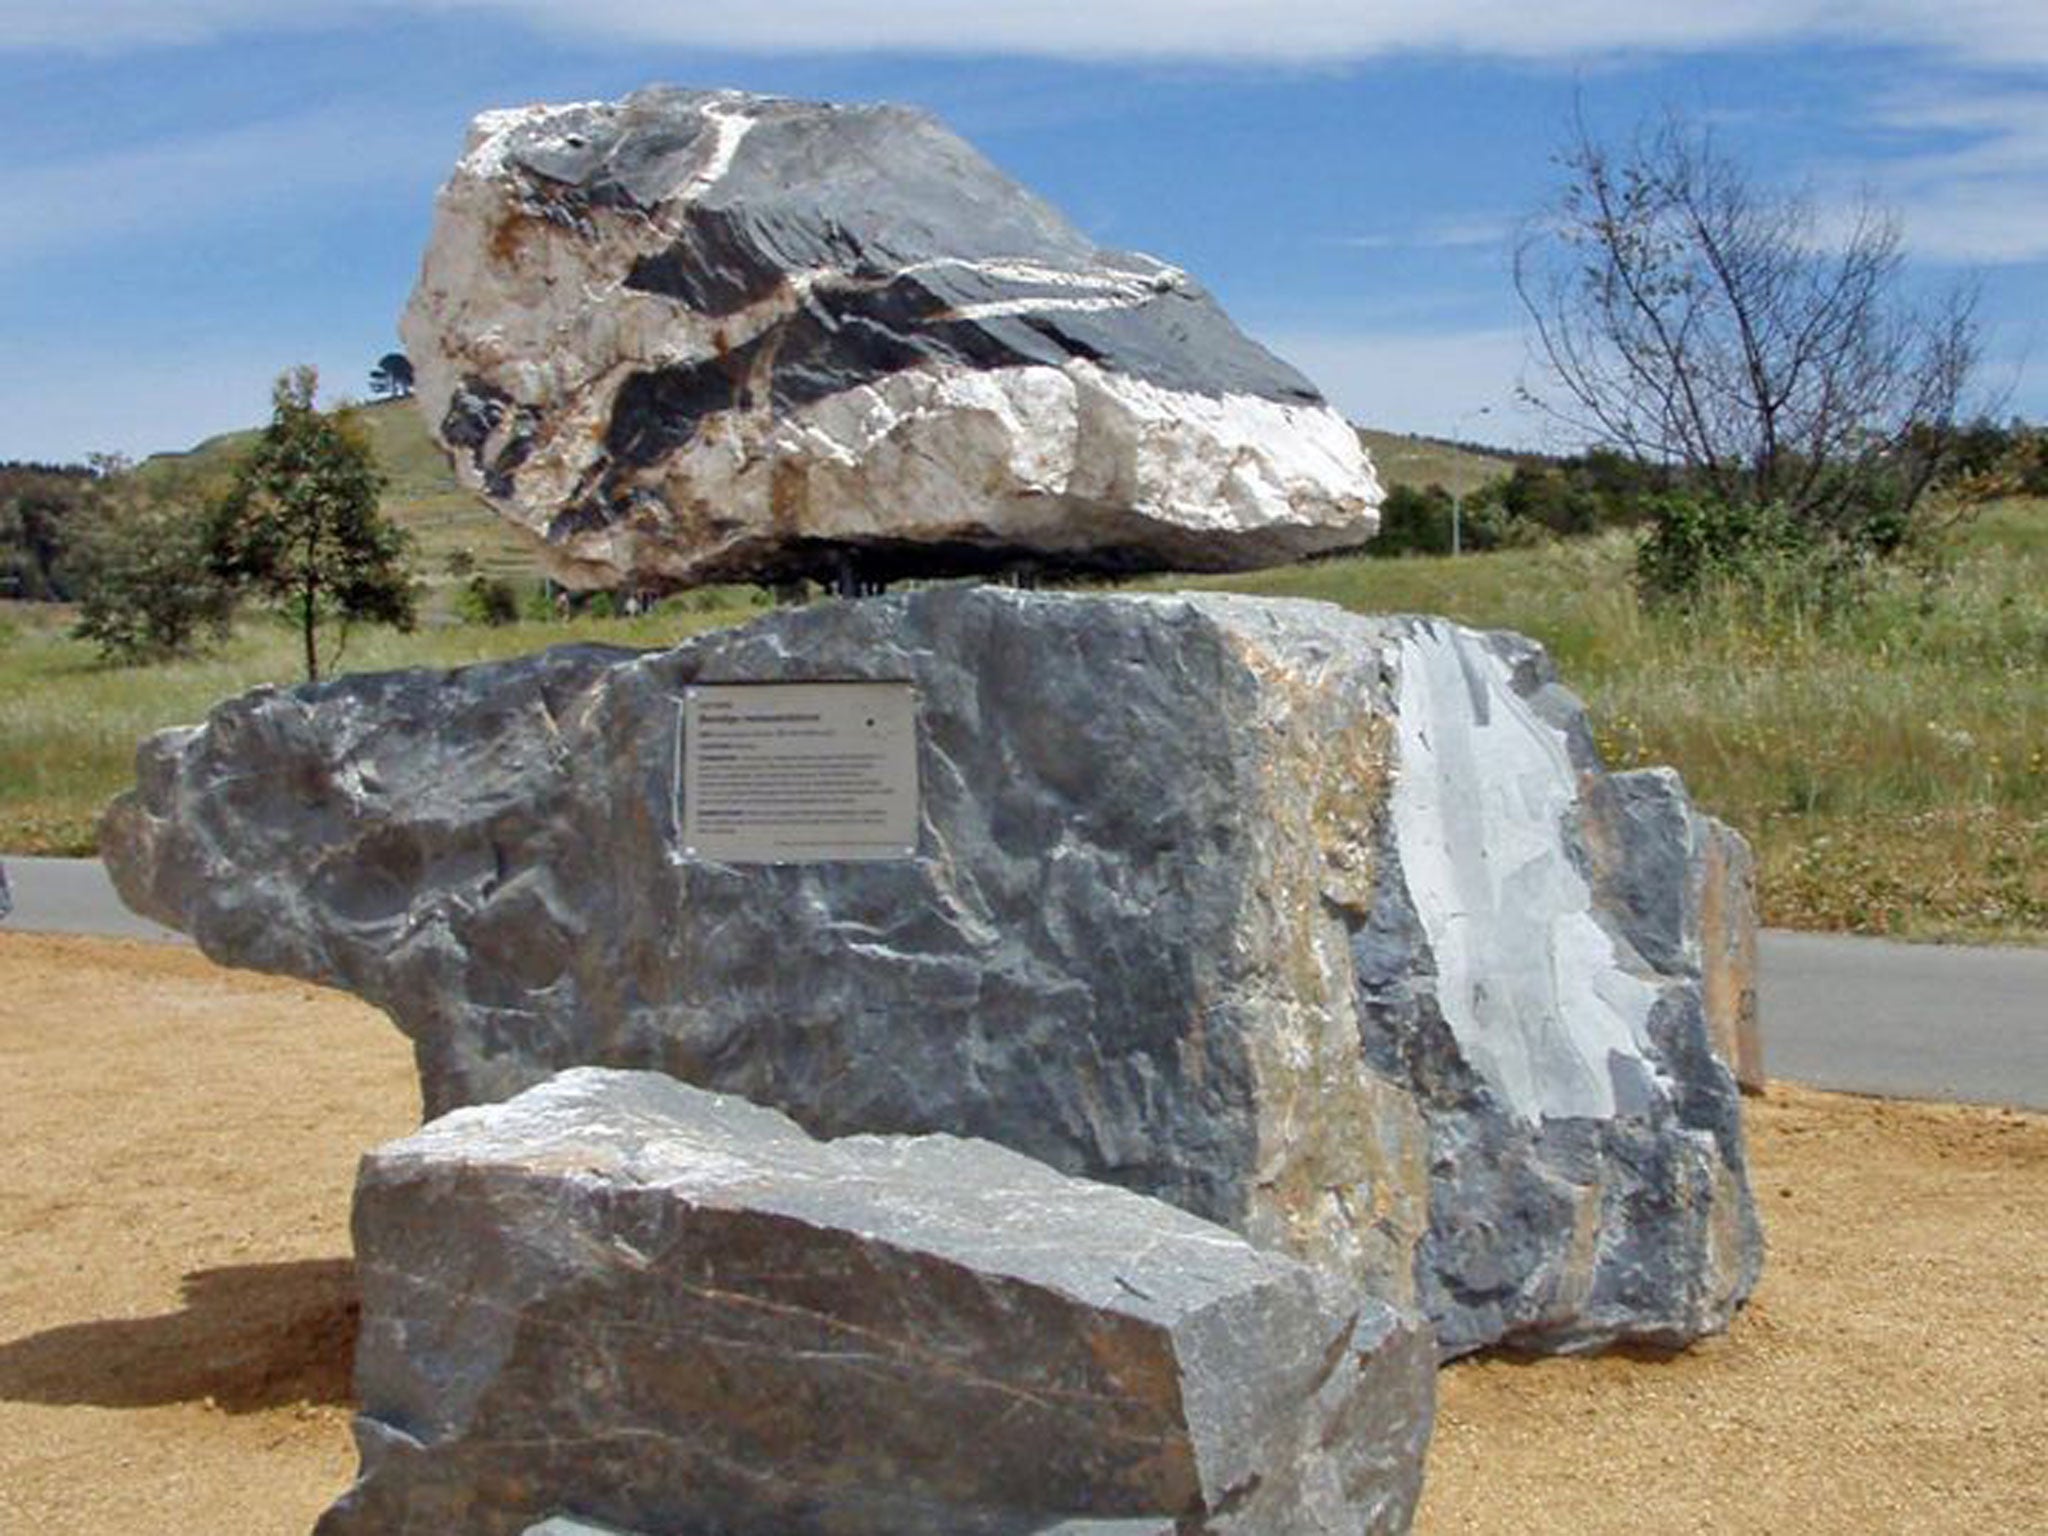 Despite its impressive appearance, the two-tonne rock from the Bendigo Goldfield in Victoria (top) actually contains an almost negligible quantity of precious materials